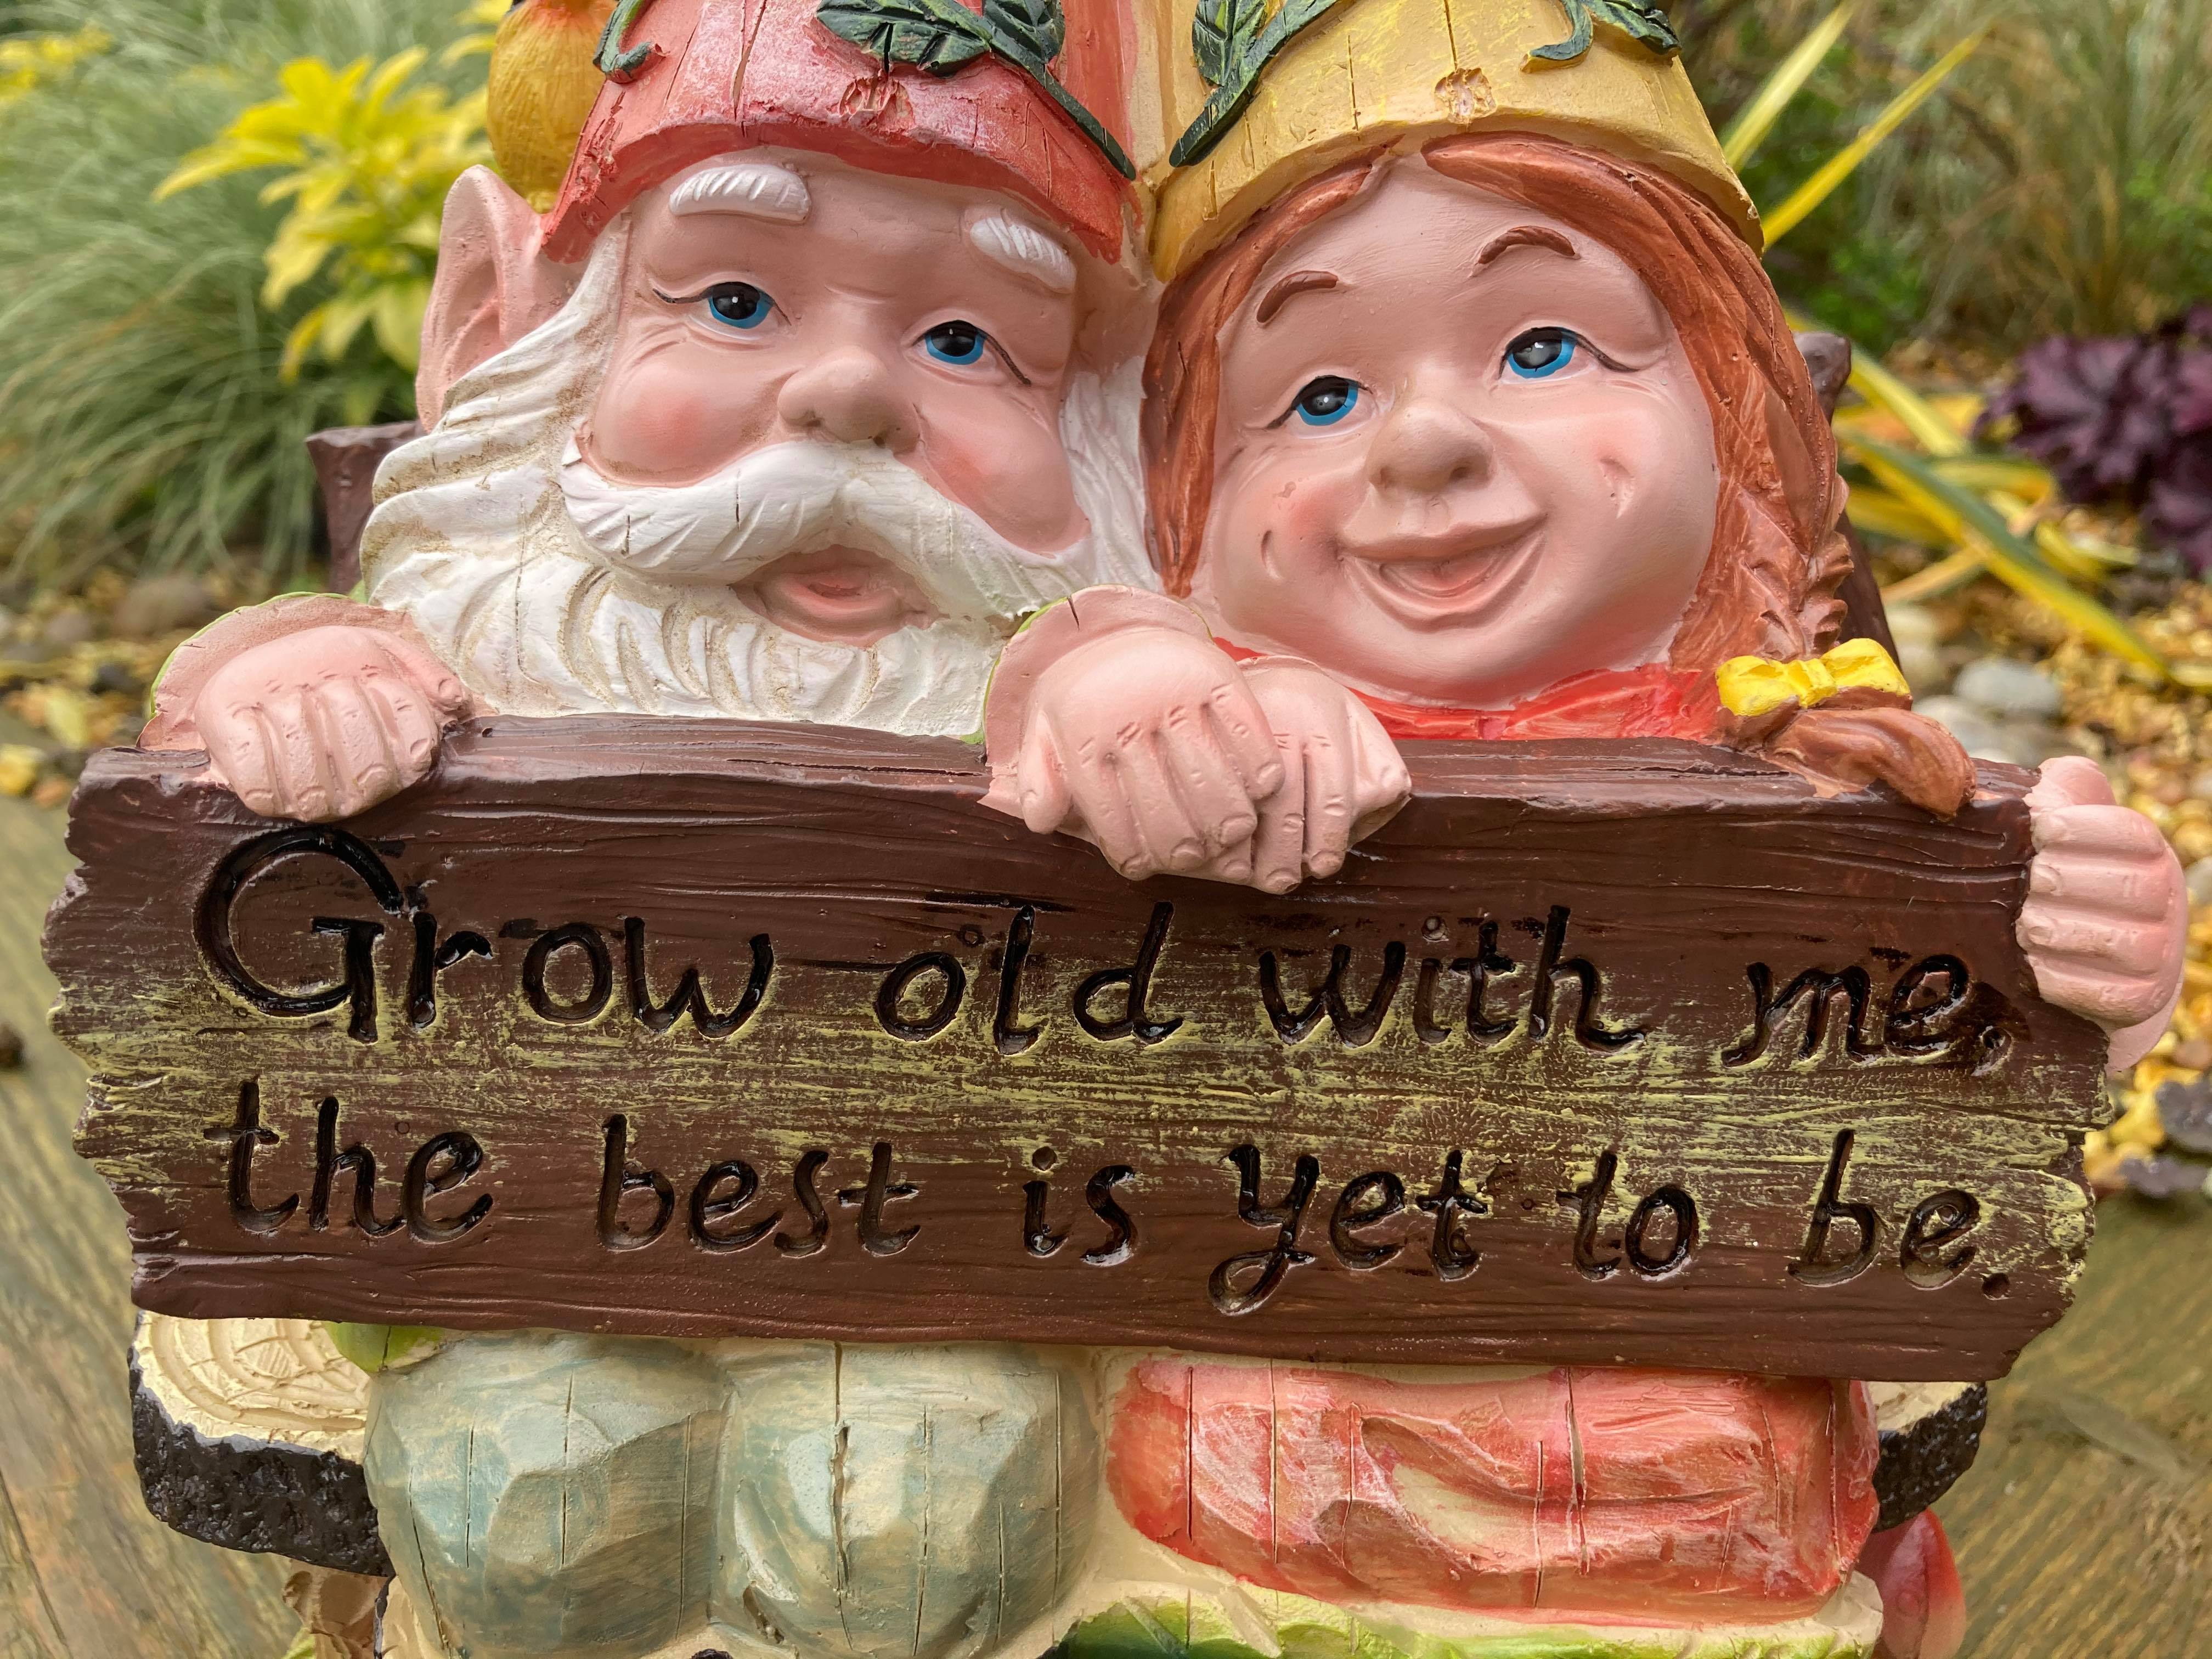 'Grow Old With Me' Gnome Couple